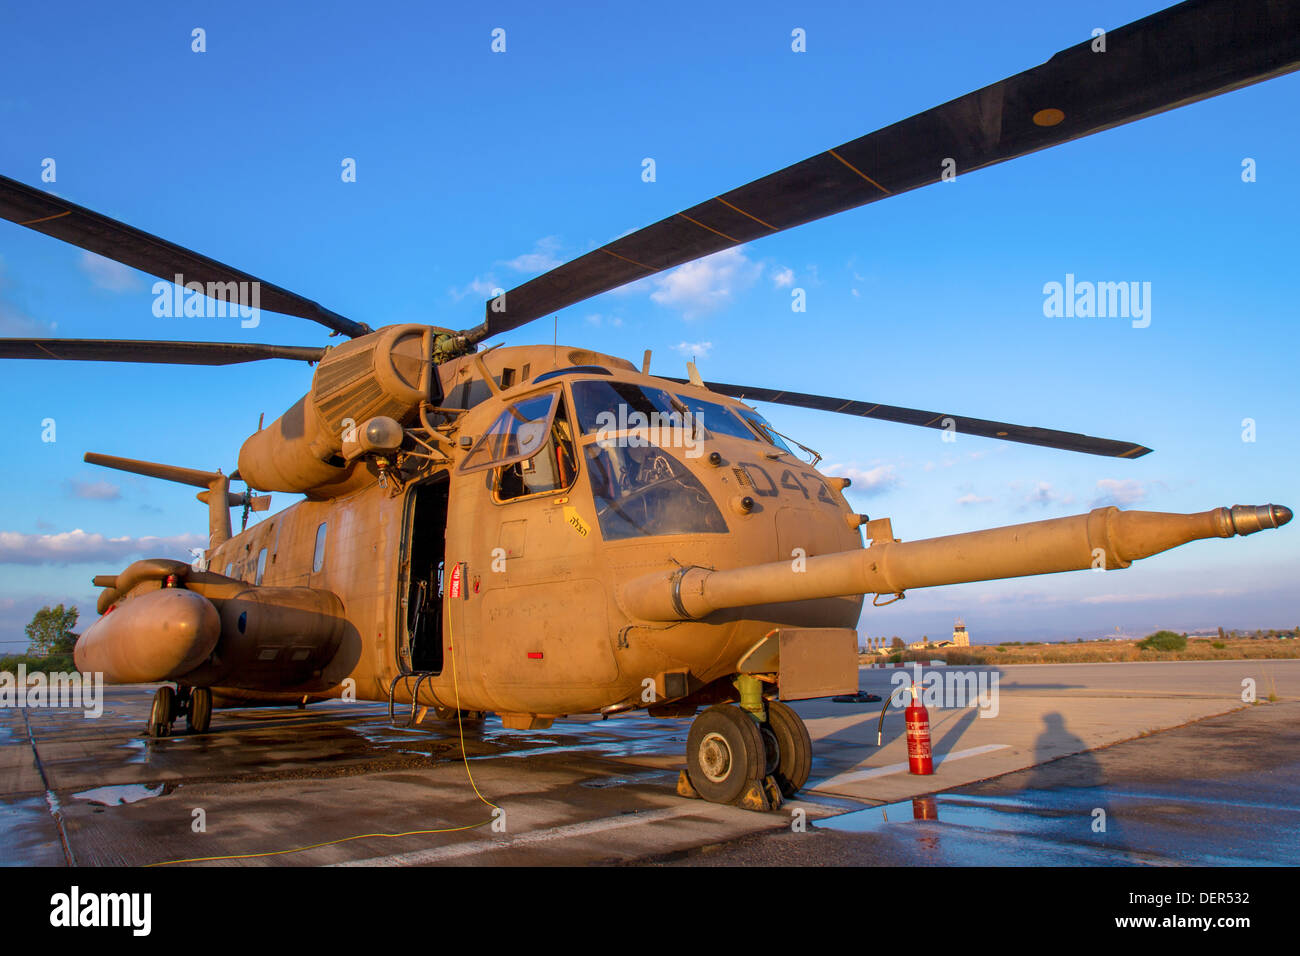 Israeli Air force (IAF) Sikorsky CH-53 helicopter on the ground Stock Photo